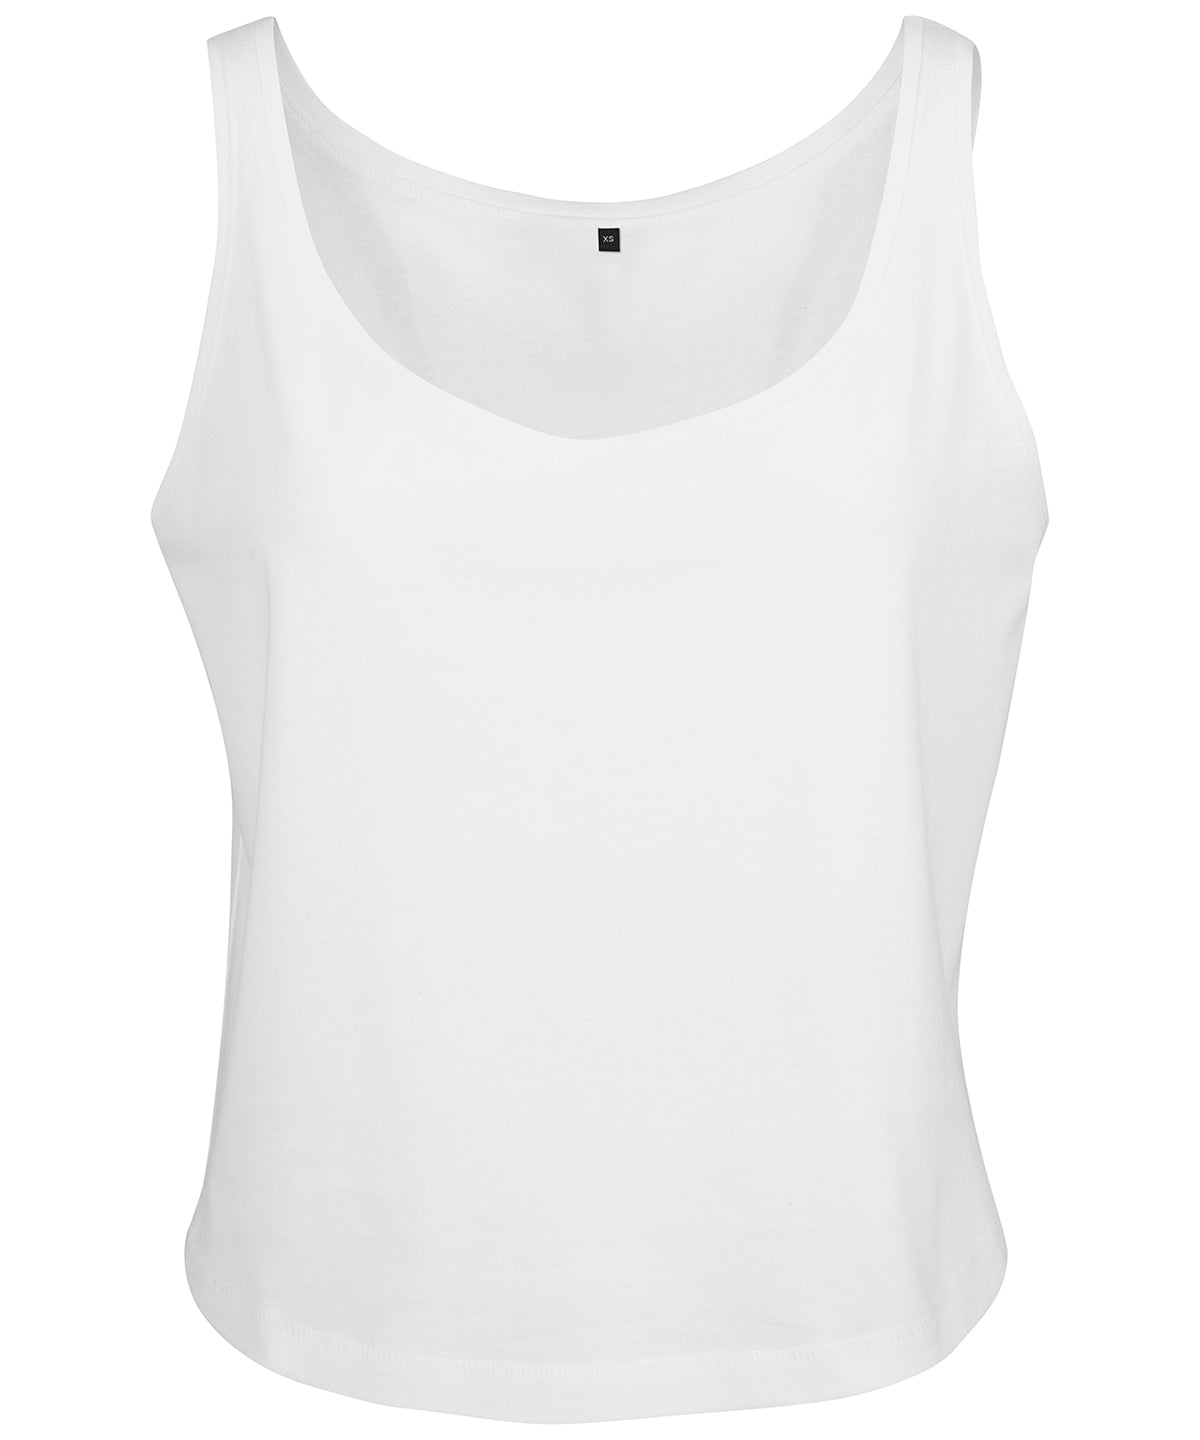 Personalised Vests - Black Build Your Brand Women's oversized tank top